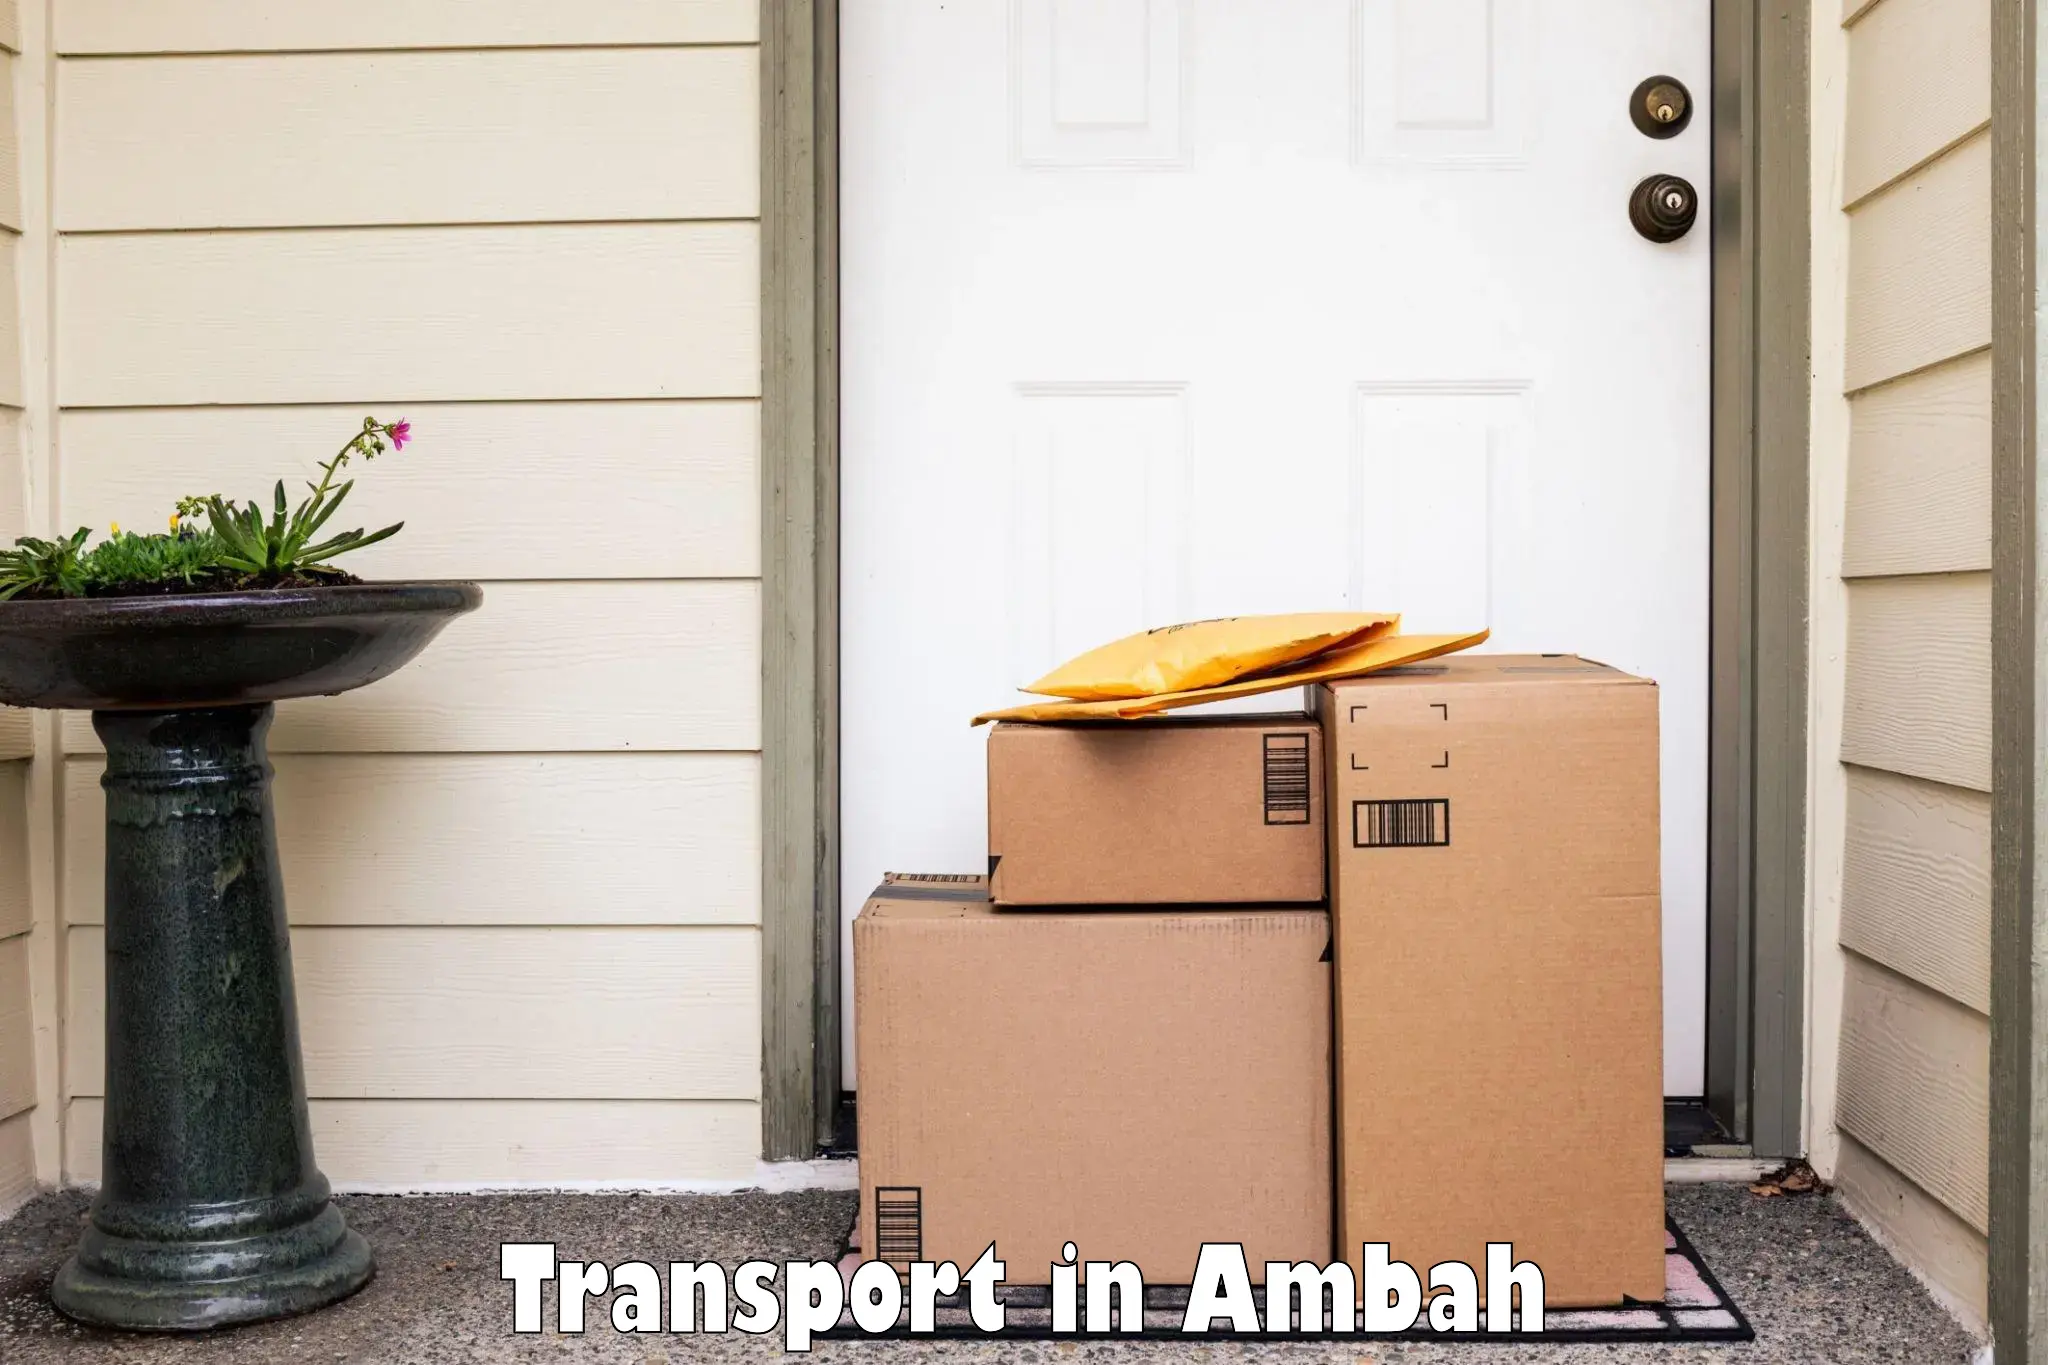 Interstate transport services in Ambah